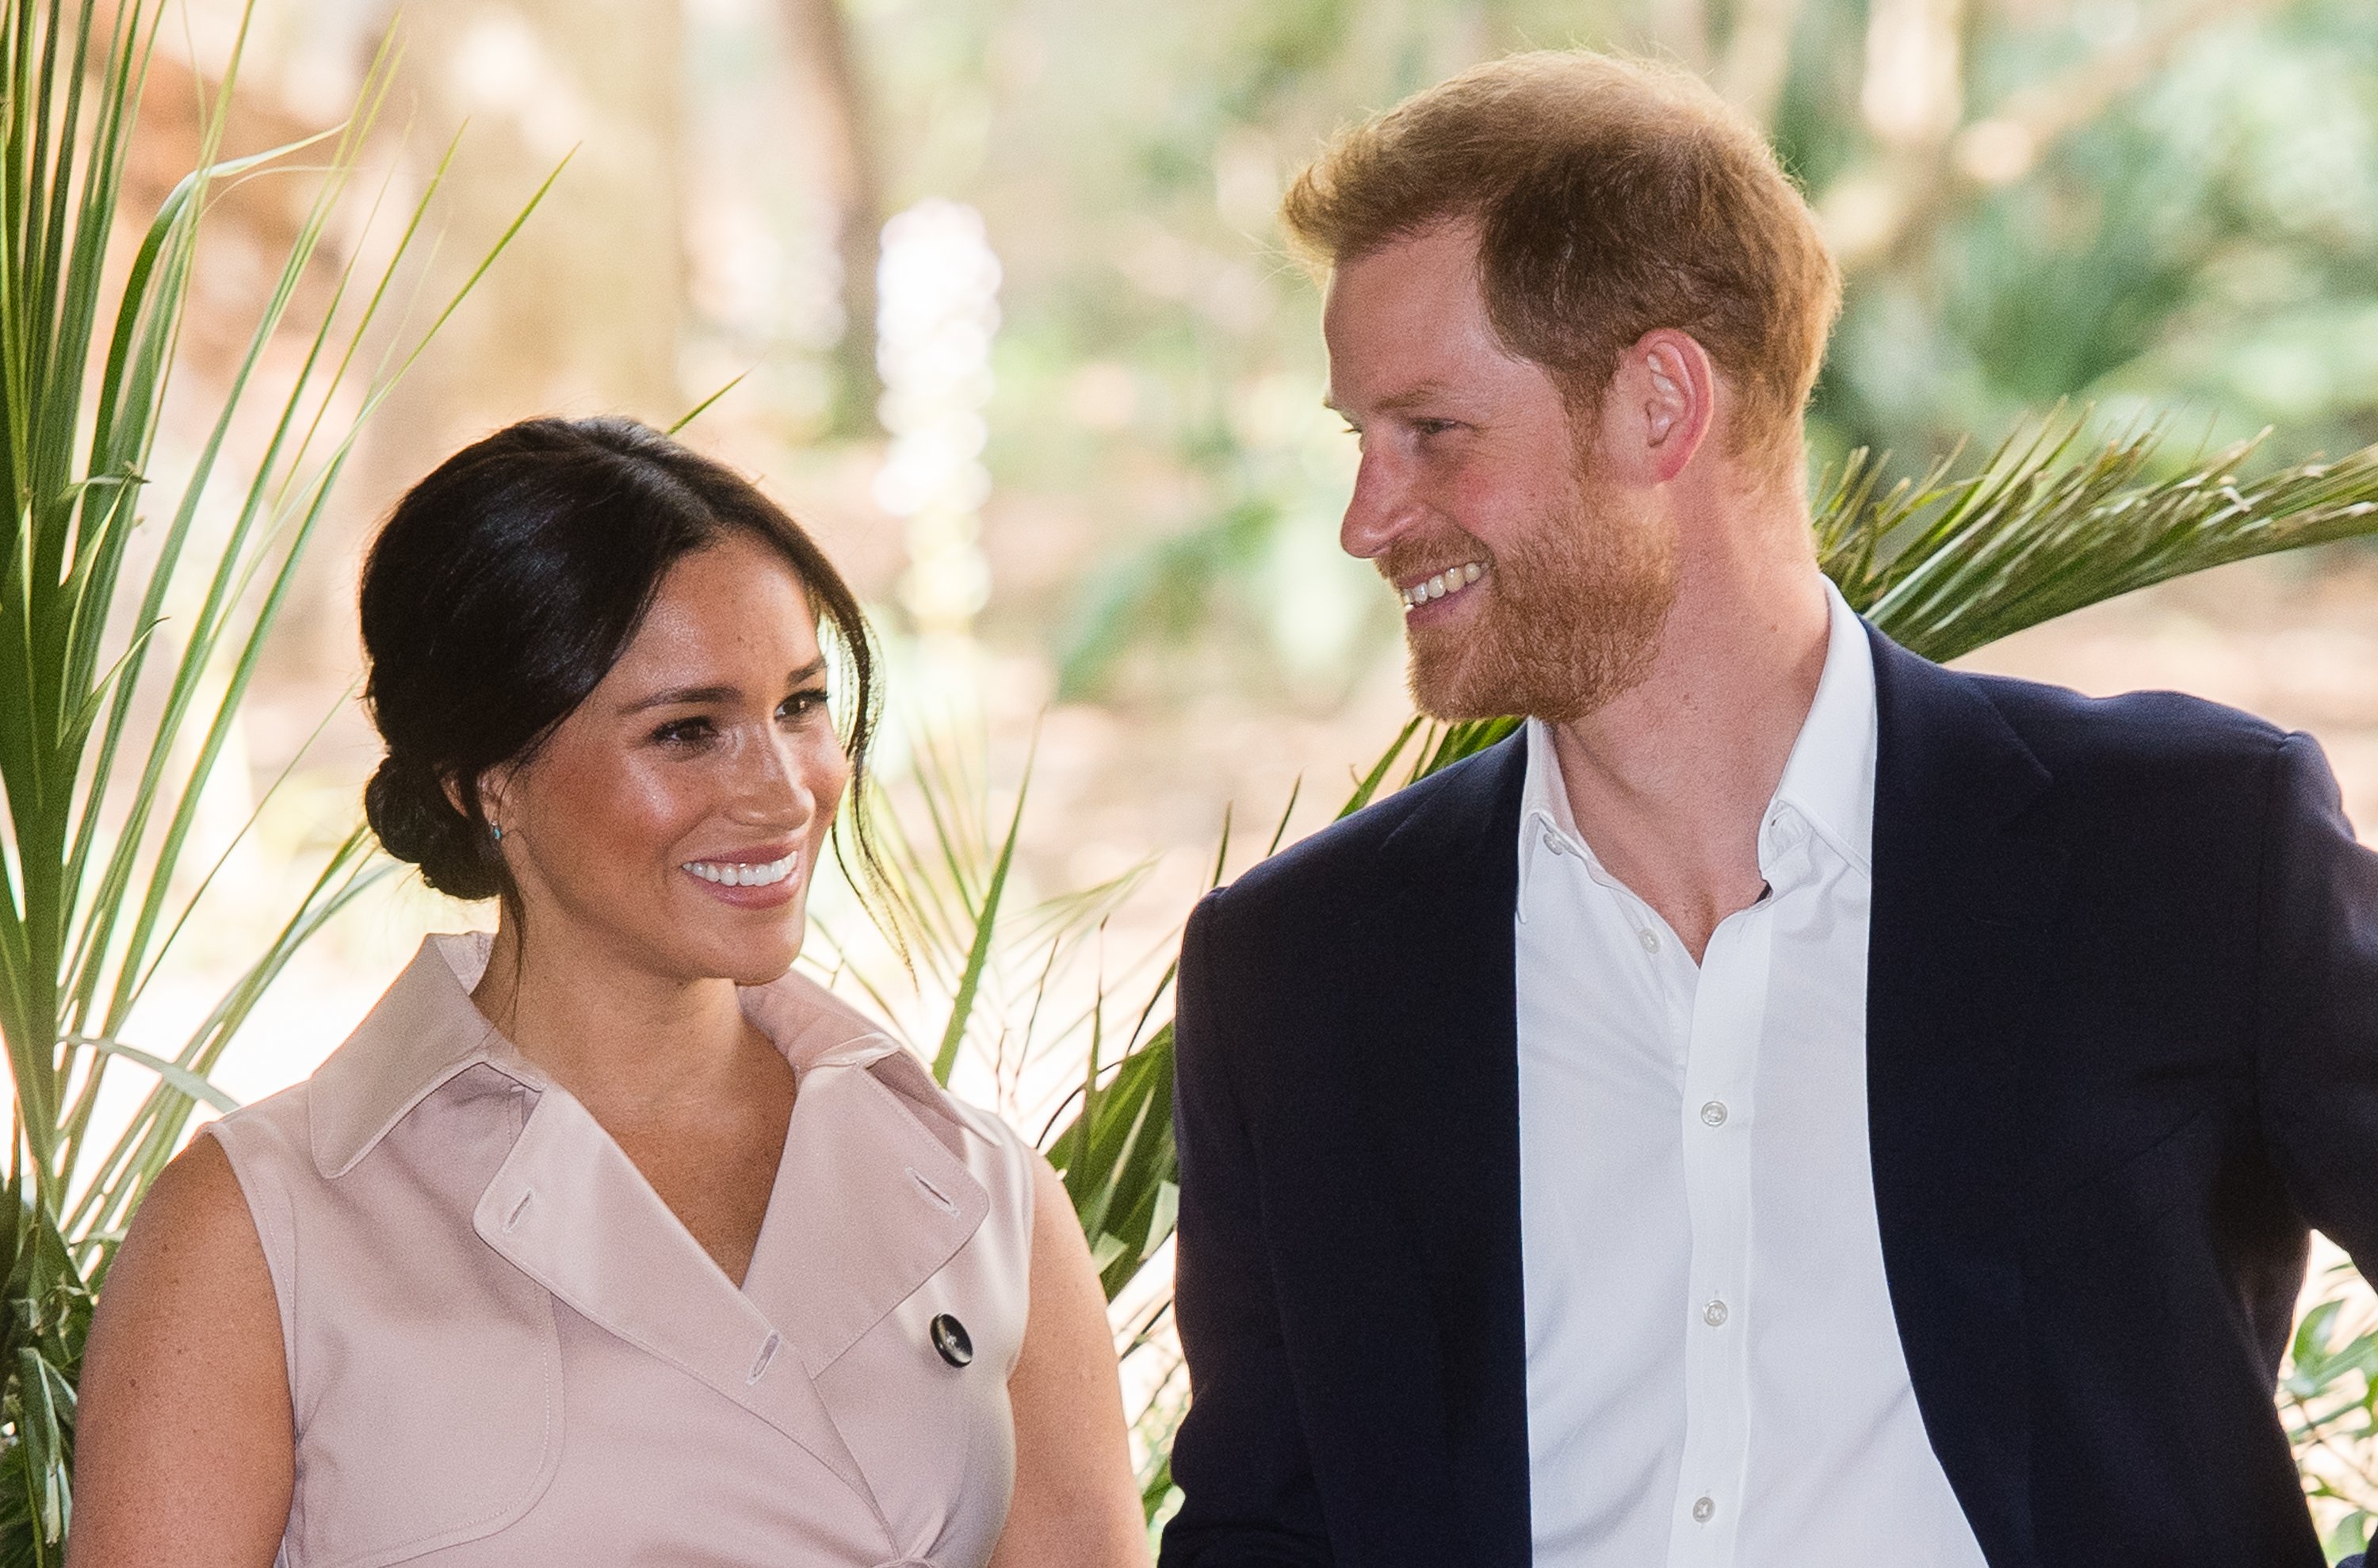 Prince Harry and Meghan visit the British High Commissioner's residence to attend an afternoon reception to celebrate the UK and South Africa's important business and investment relationship, looking ahead to the Africa Investment Summit the UK will host in 2020. | Source: Getty Images